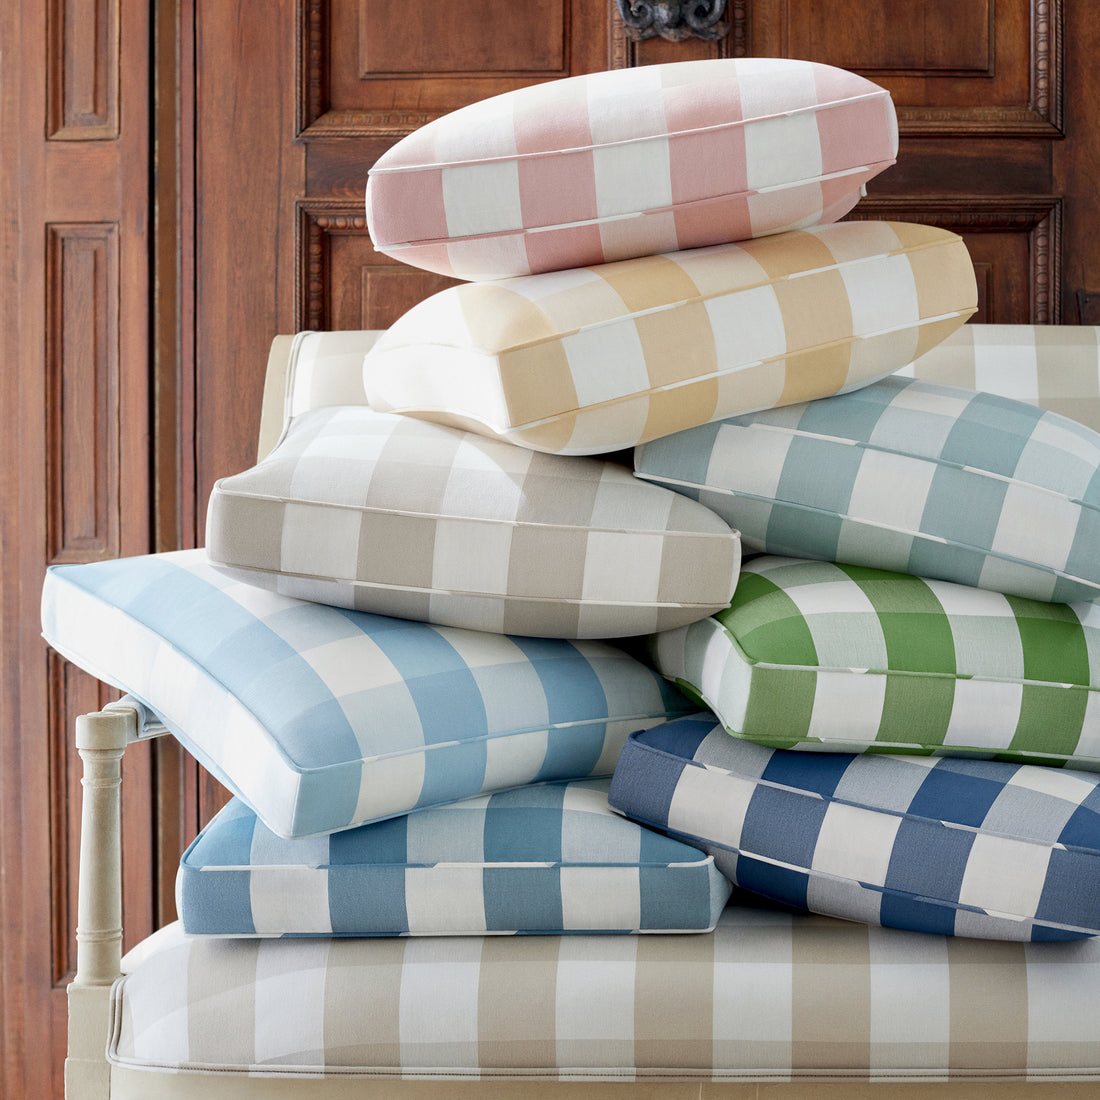 Pillows in Hammond Check woven fabric - pattern number AW24505 - by Anna French in the Devon collection